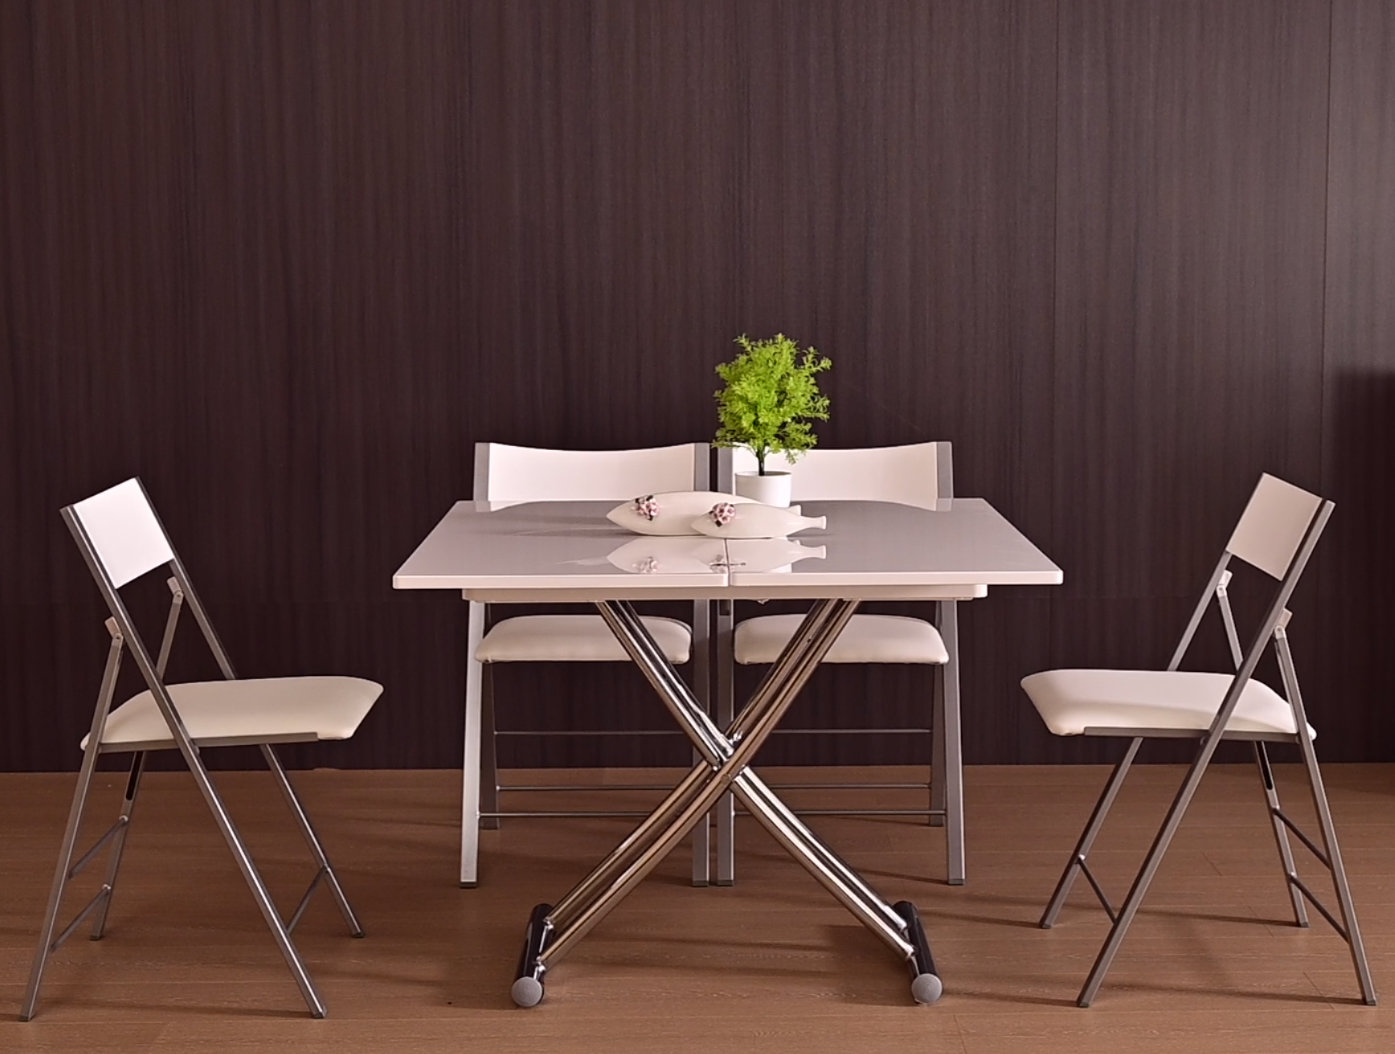 Coffee transforming table doubles in size and expandable